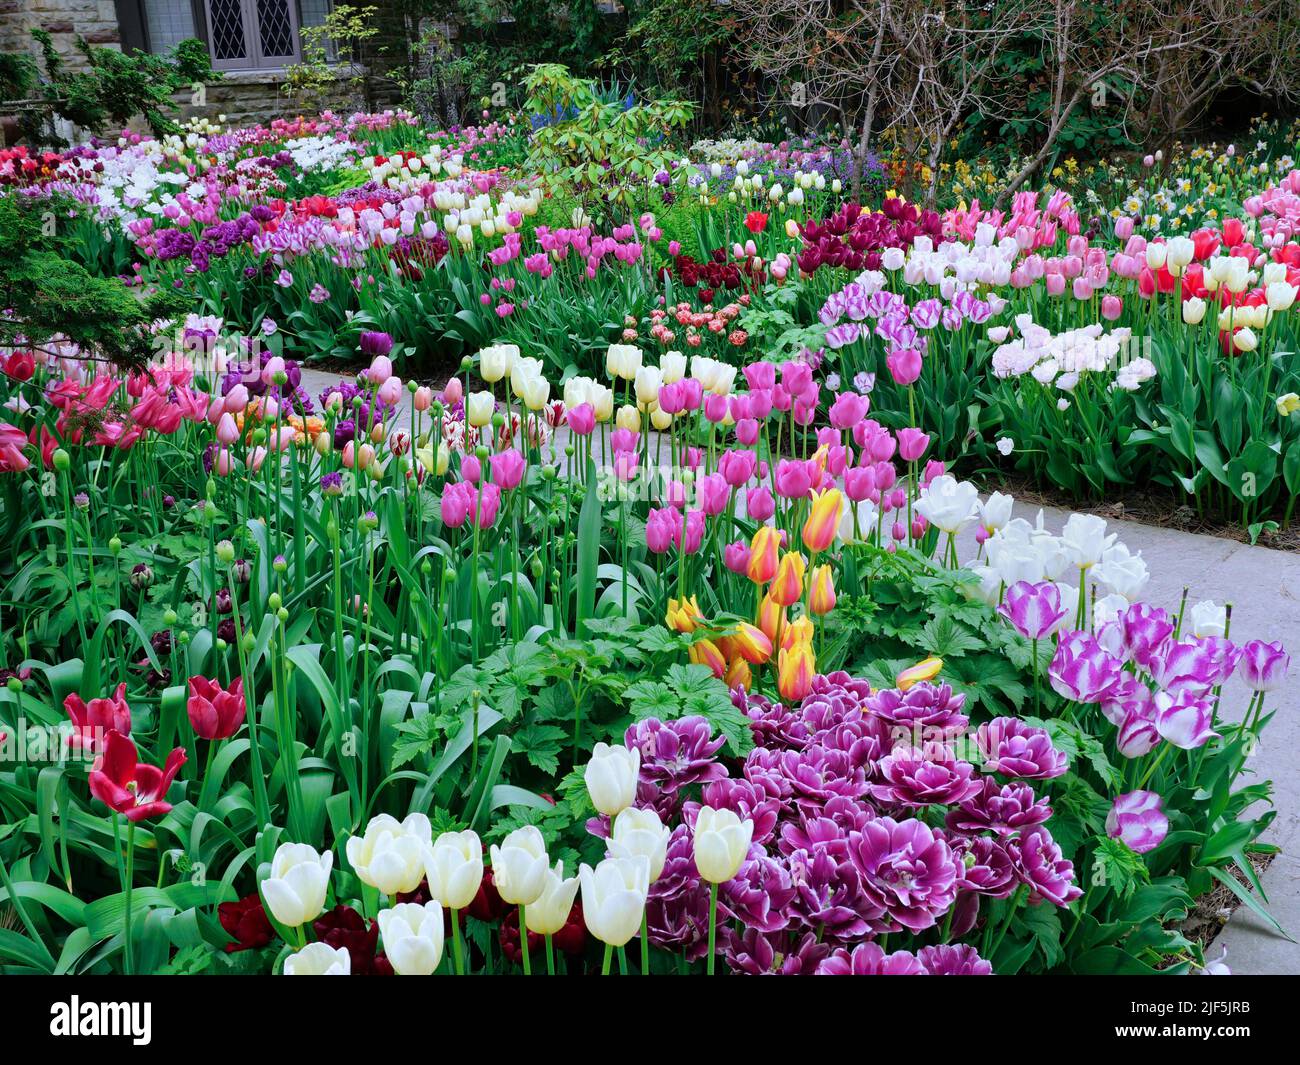 Garden with large number of tulips in many colors Stock Photo